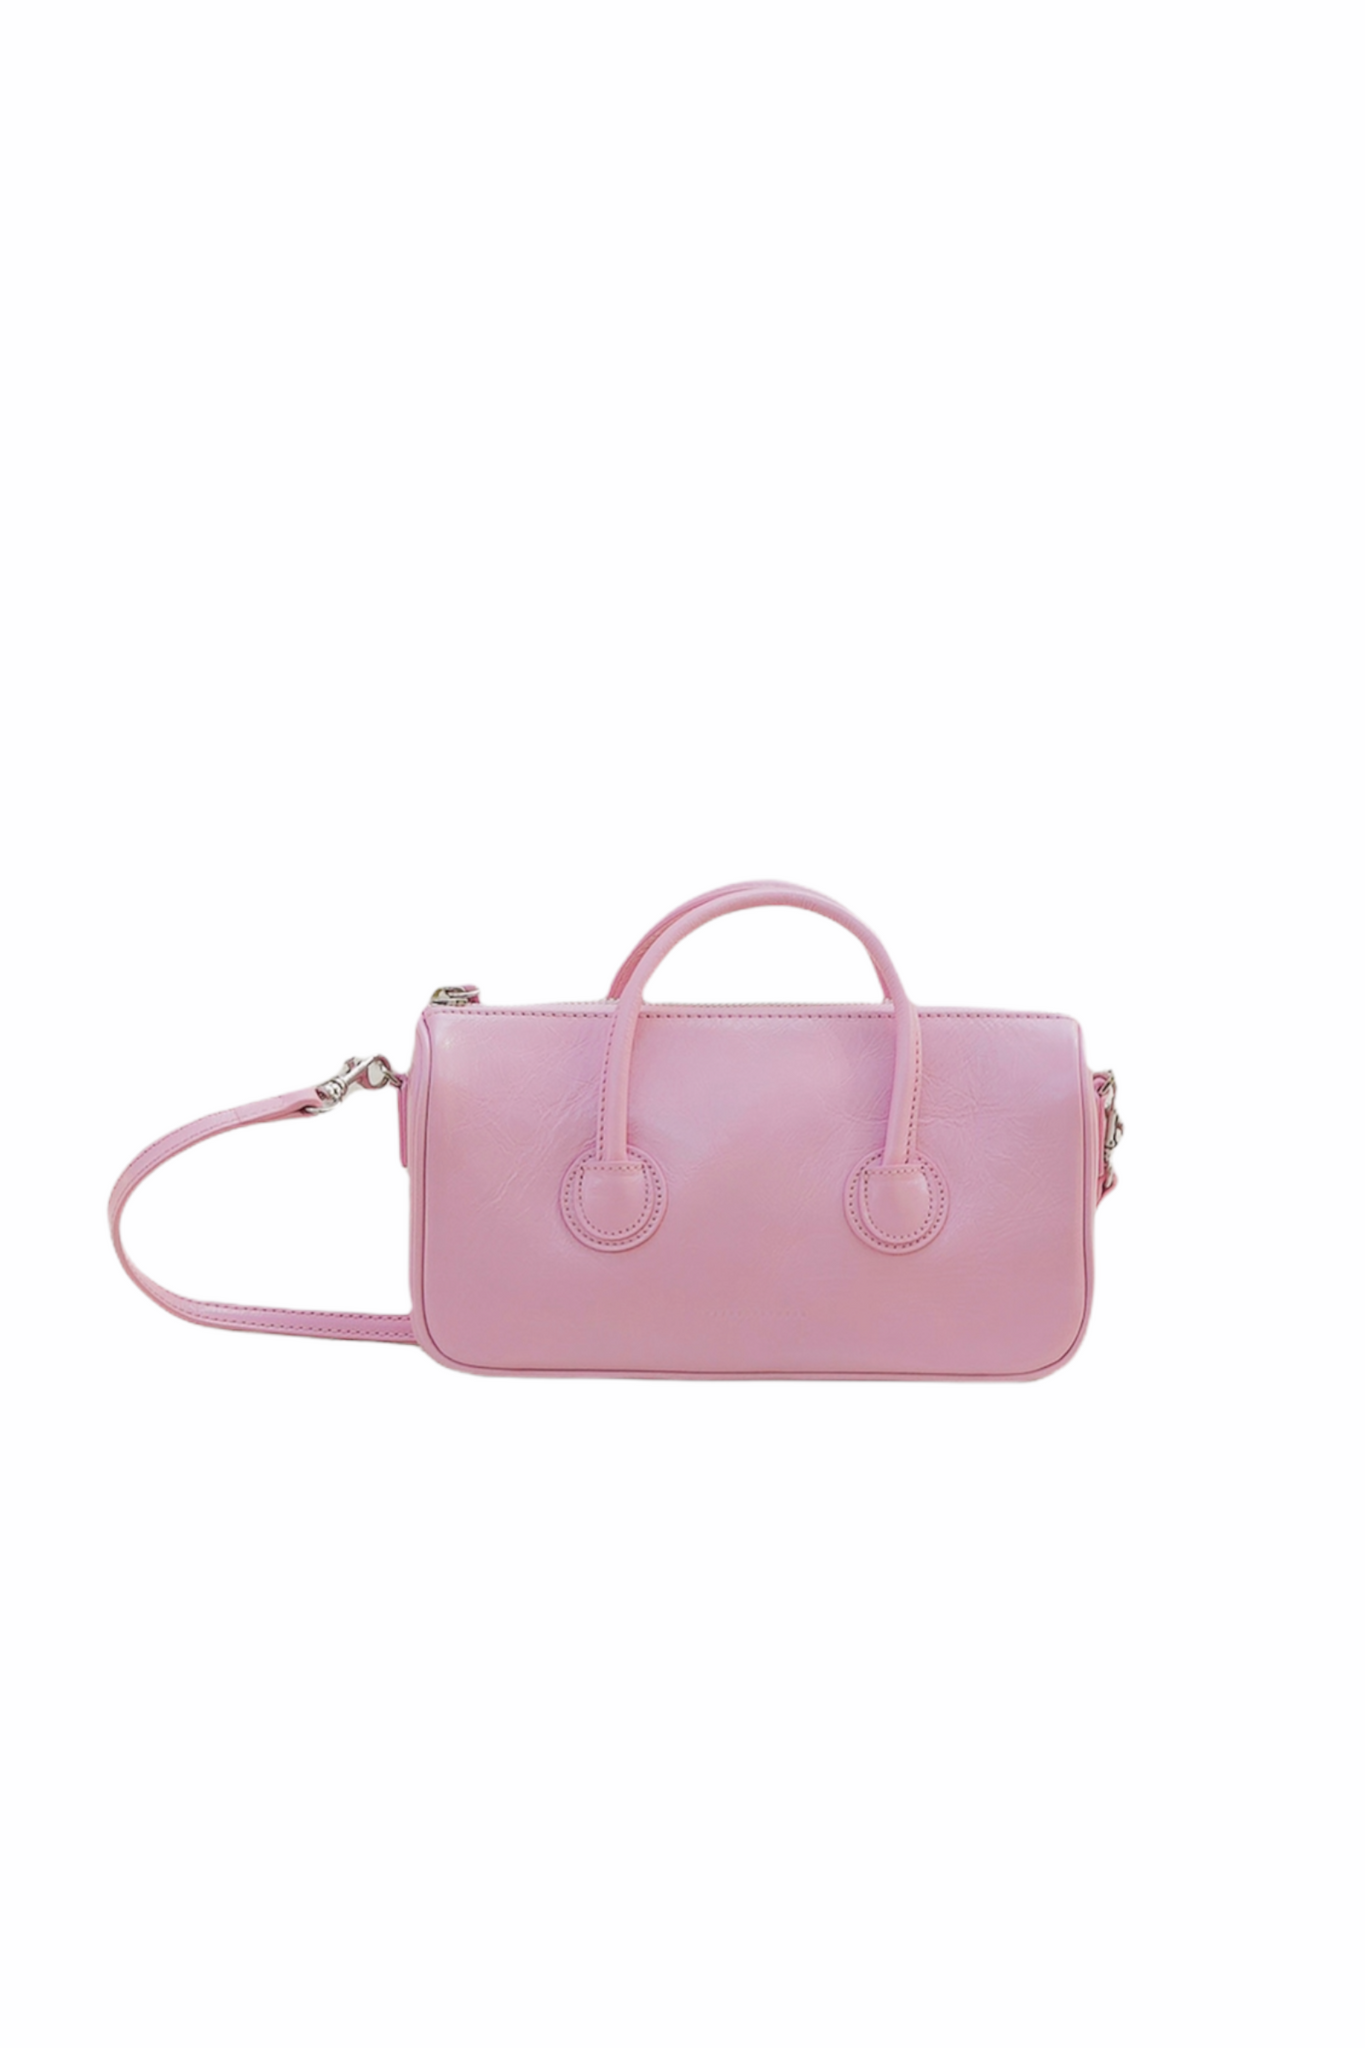 SMALL ZIPPER BAG IN PINK BY MARGESHERWOOD